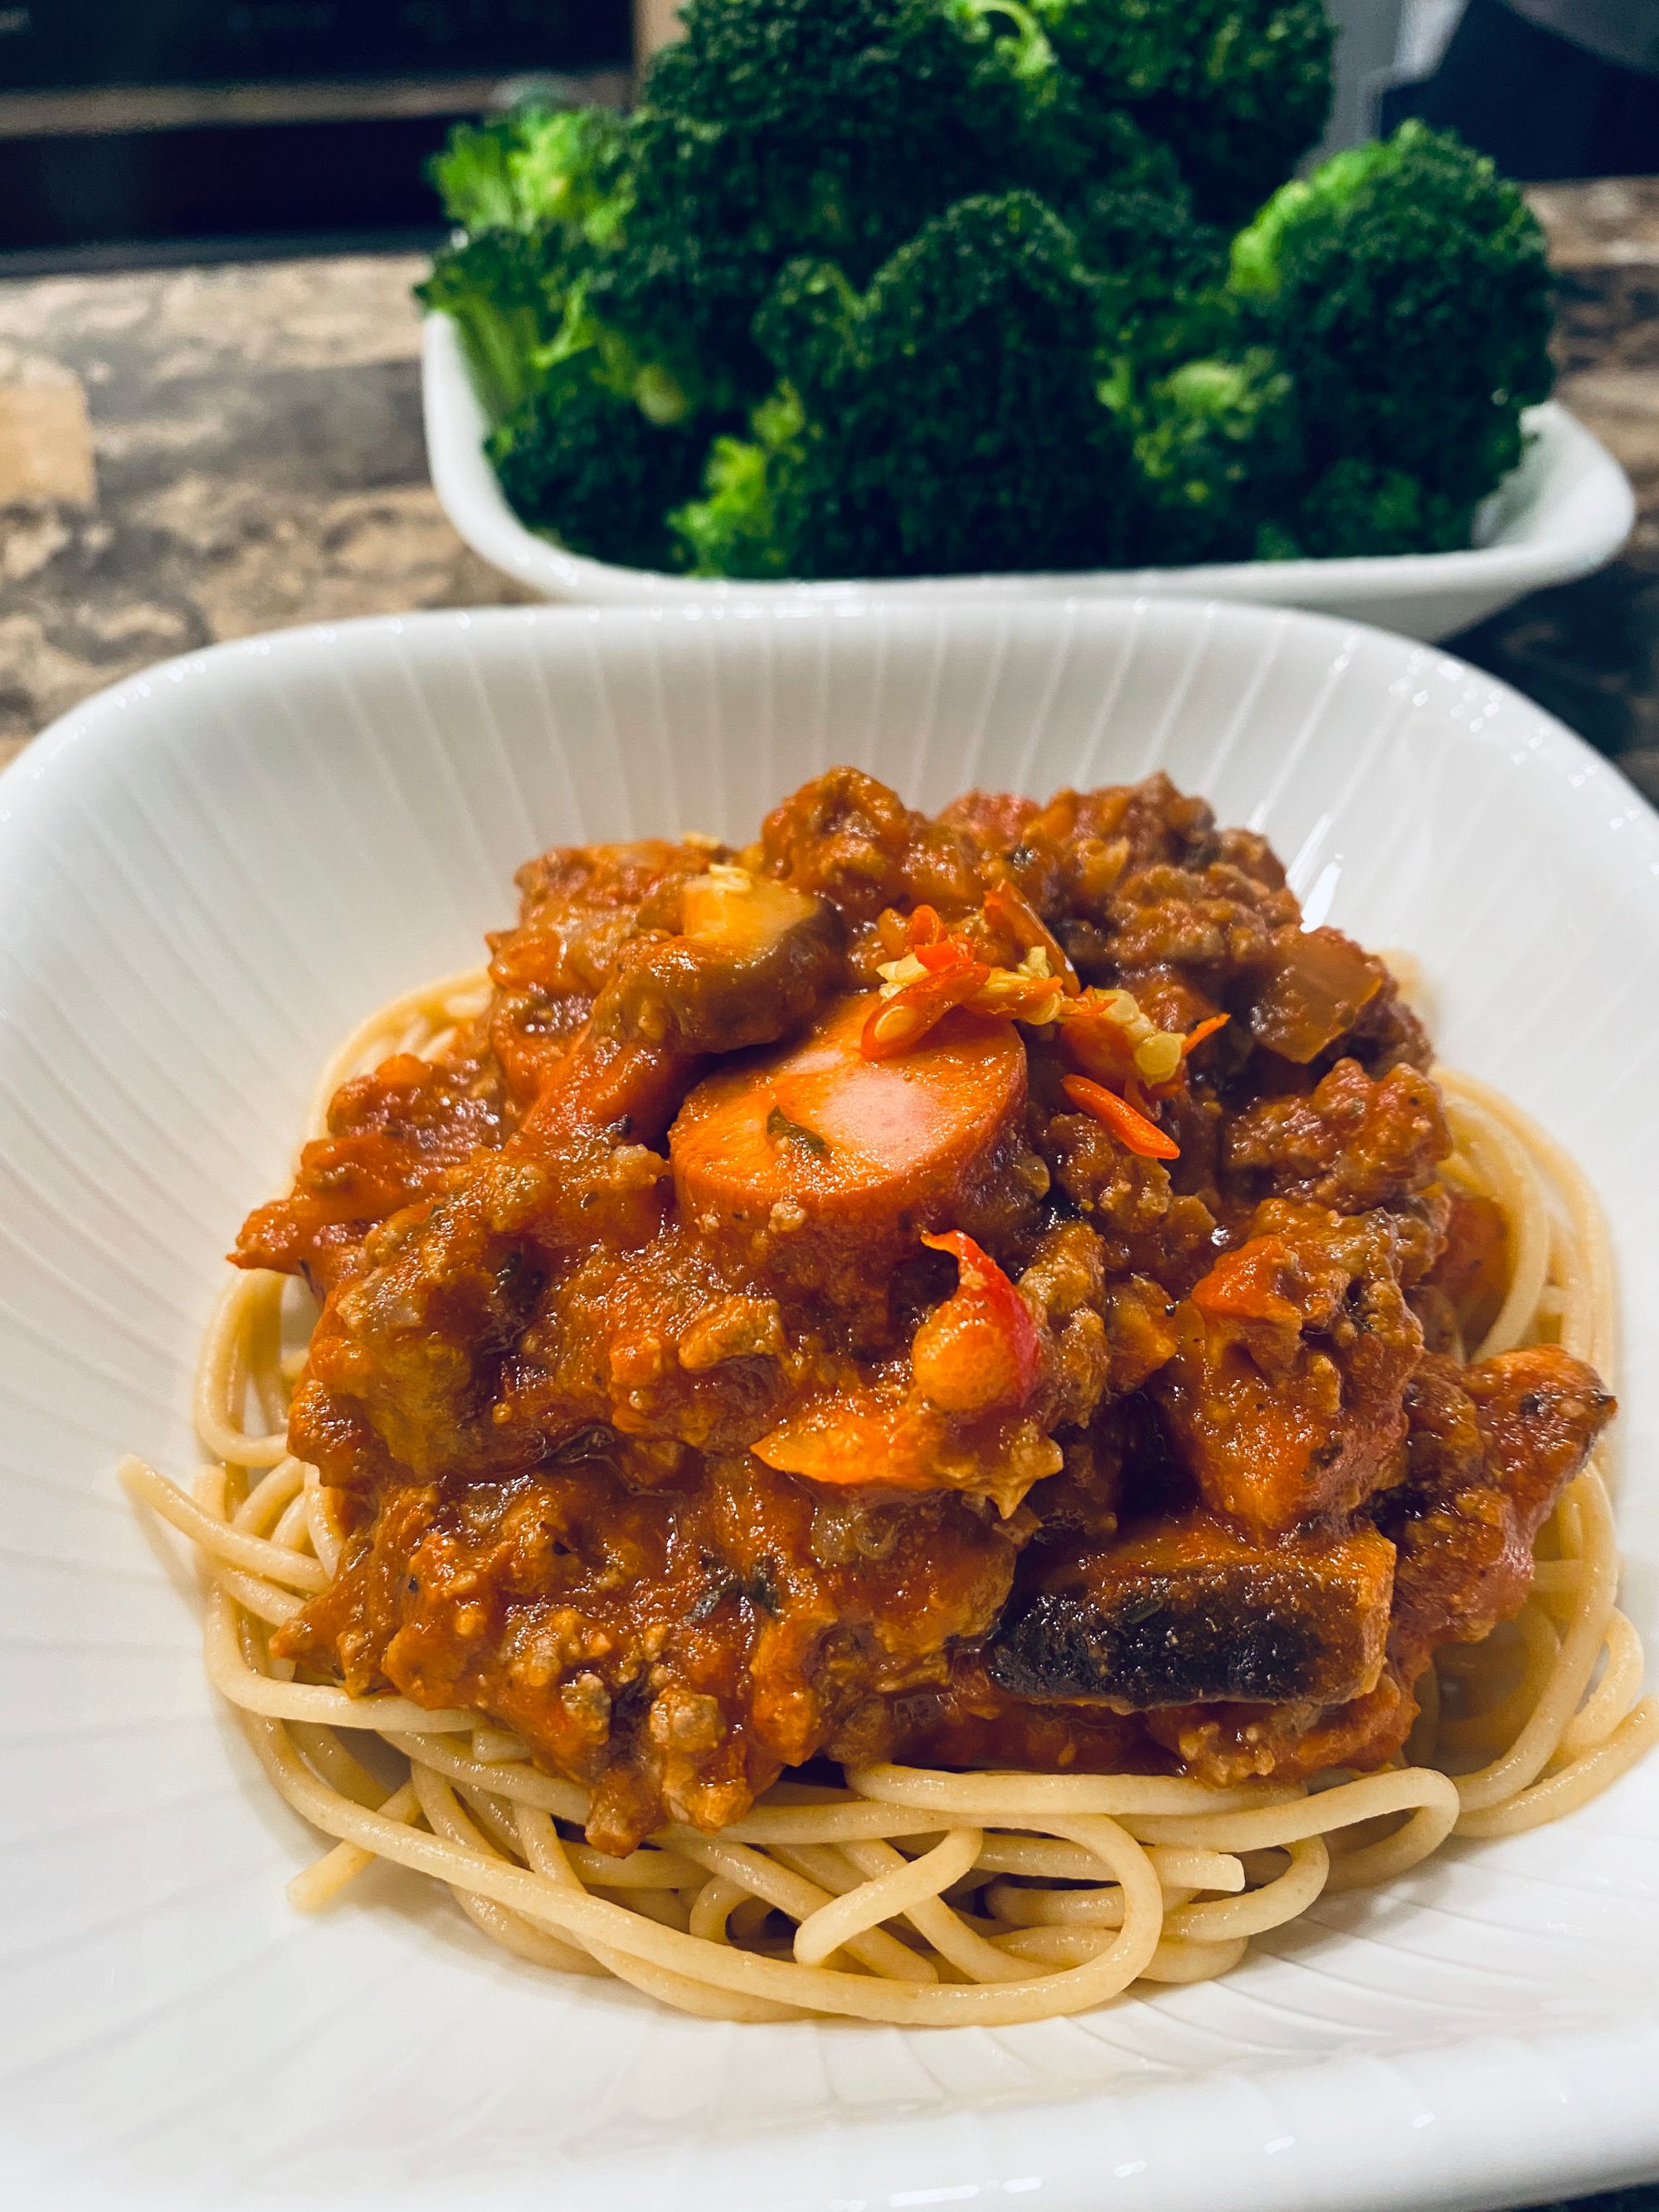 Spaghetti Sauce with ground beef, mushrooms, and hot links